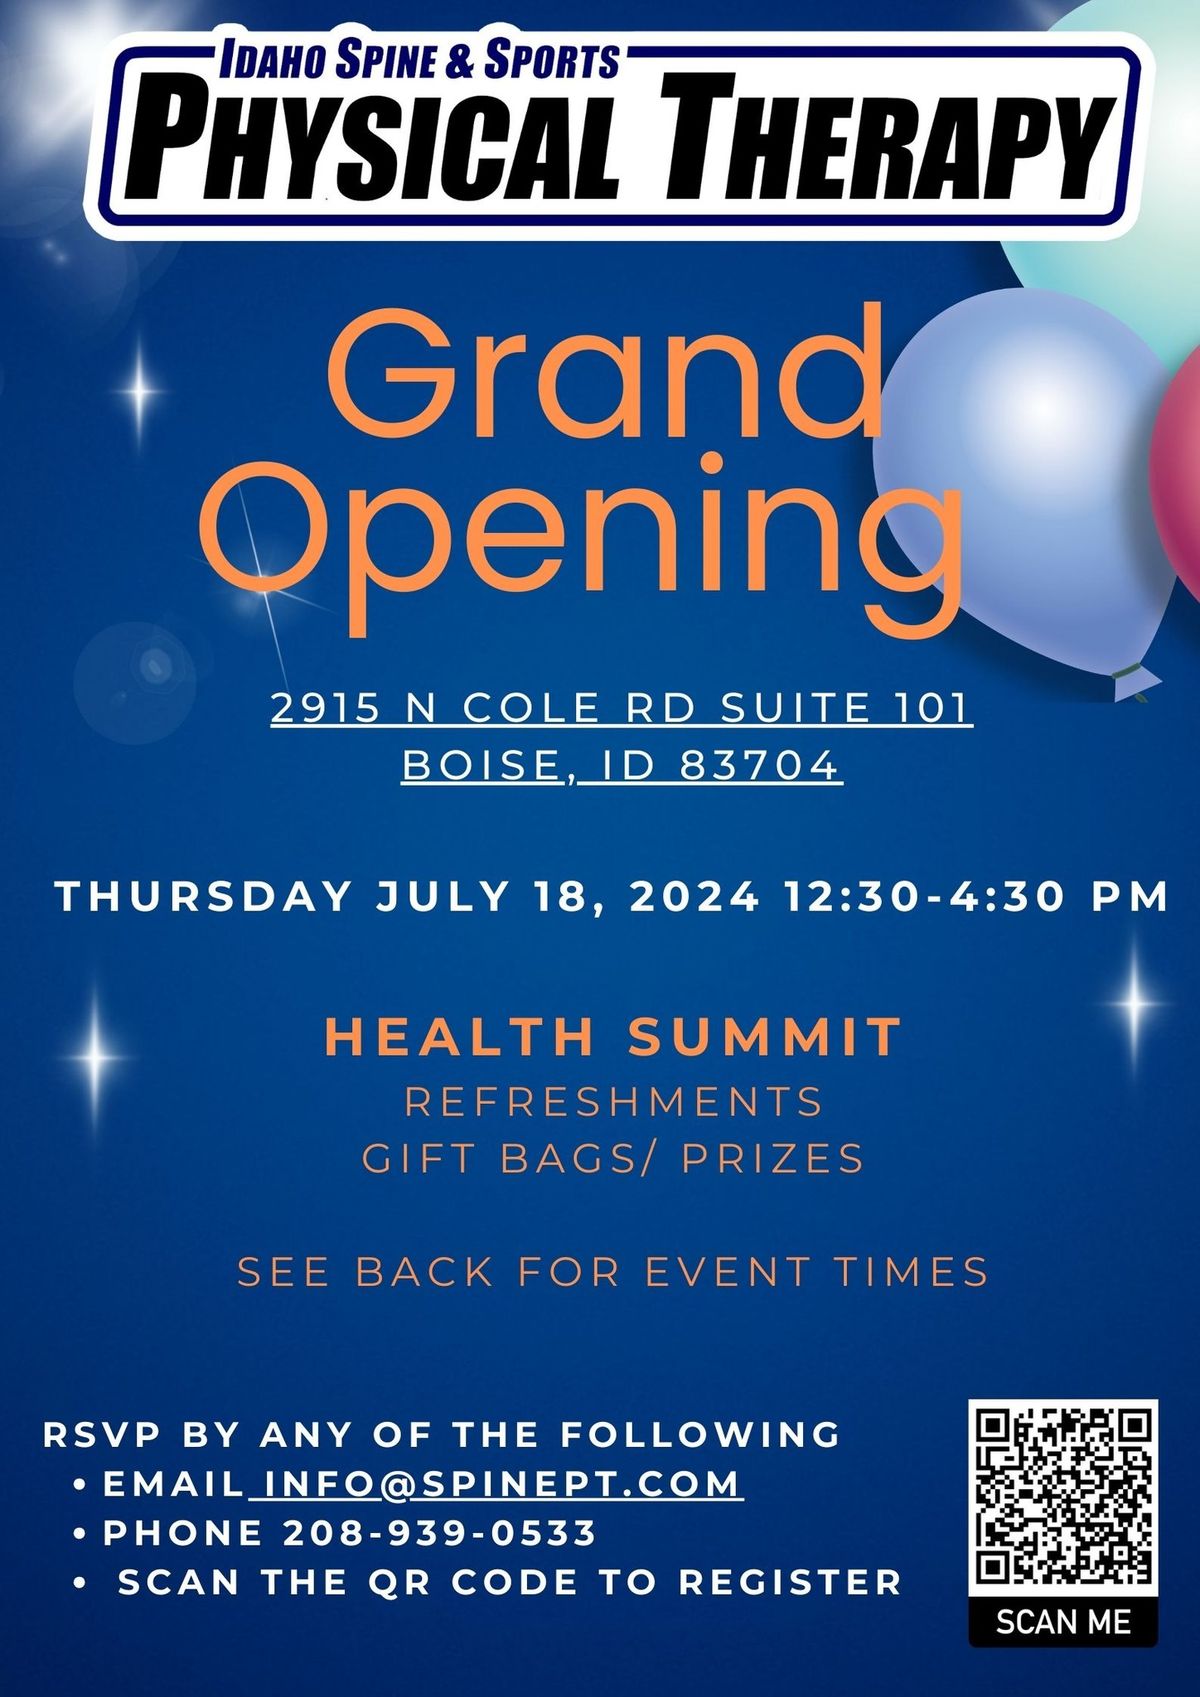 Grand Opening of ISSPT's 5th Location & Health Summit!